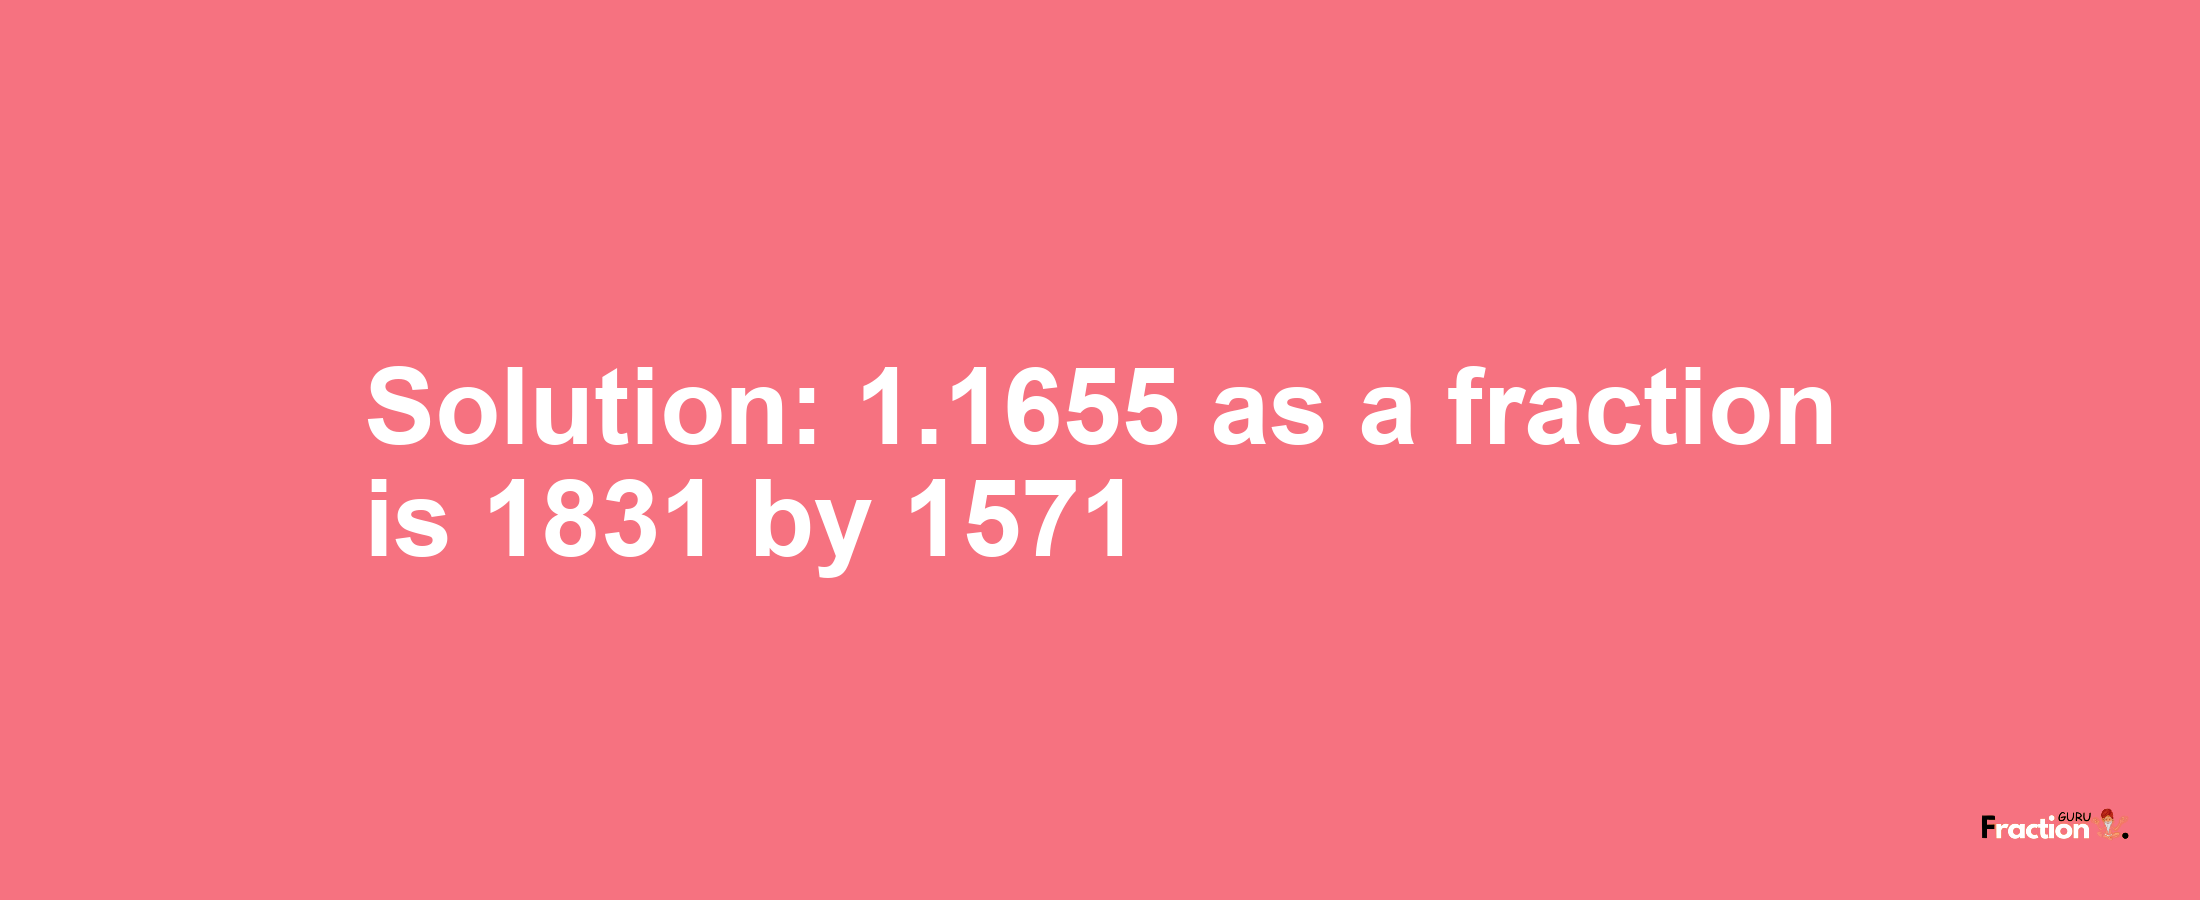 Solution:1.1655 as a fraction is 1831/1571